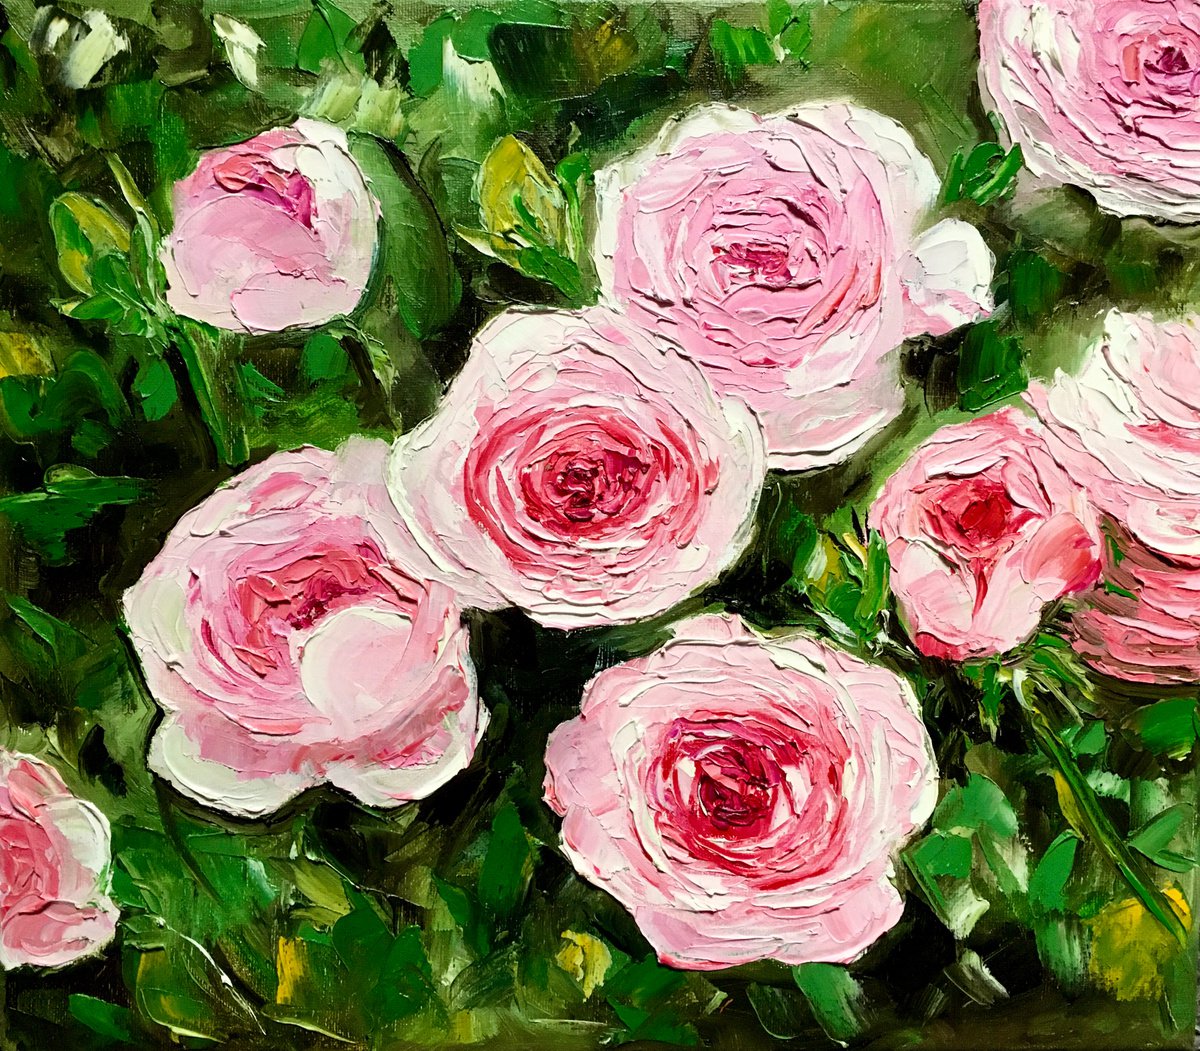 Roses in bloom, garden, oil painting on canvas. by Olga Koval